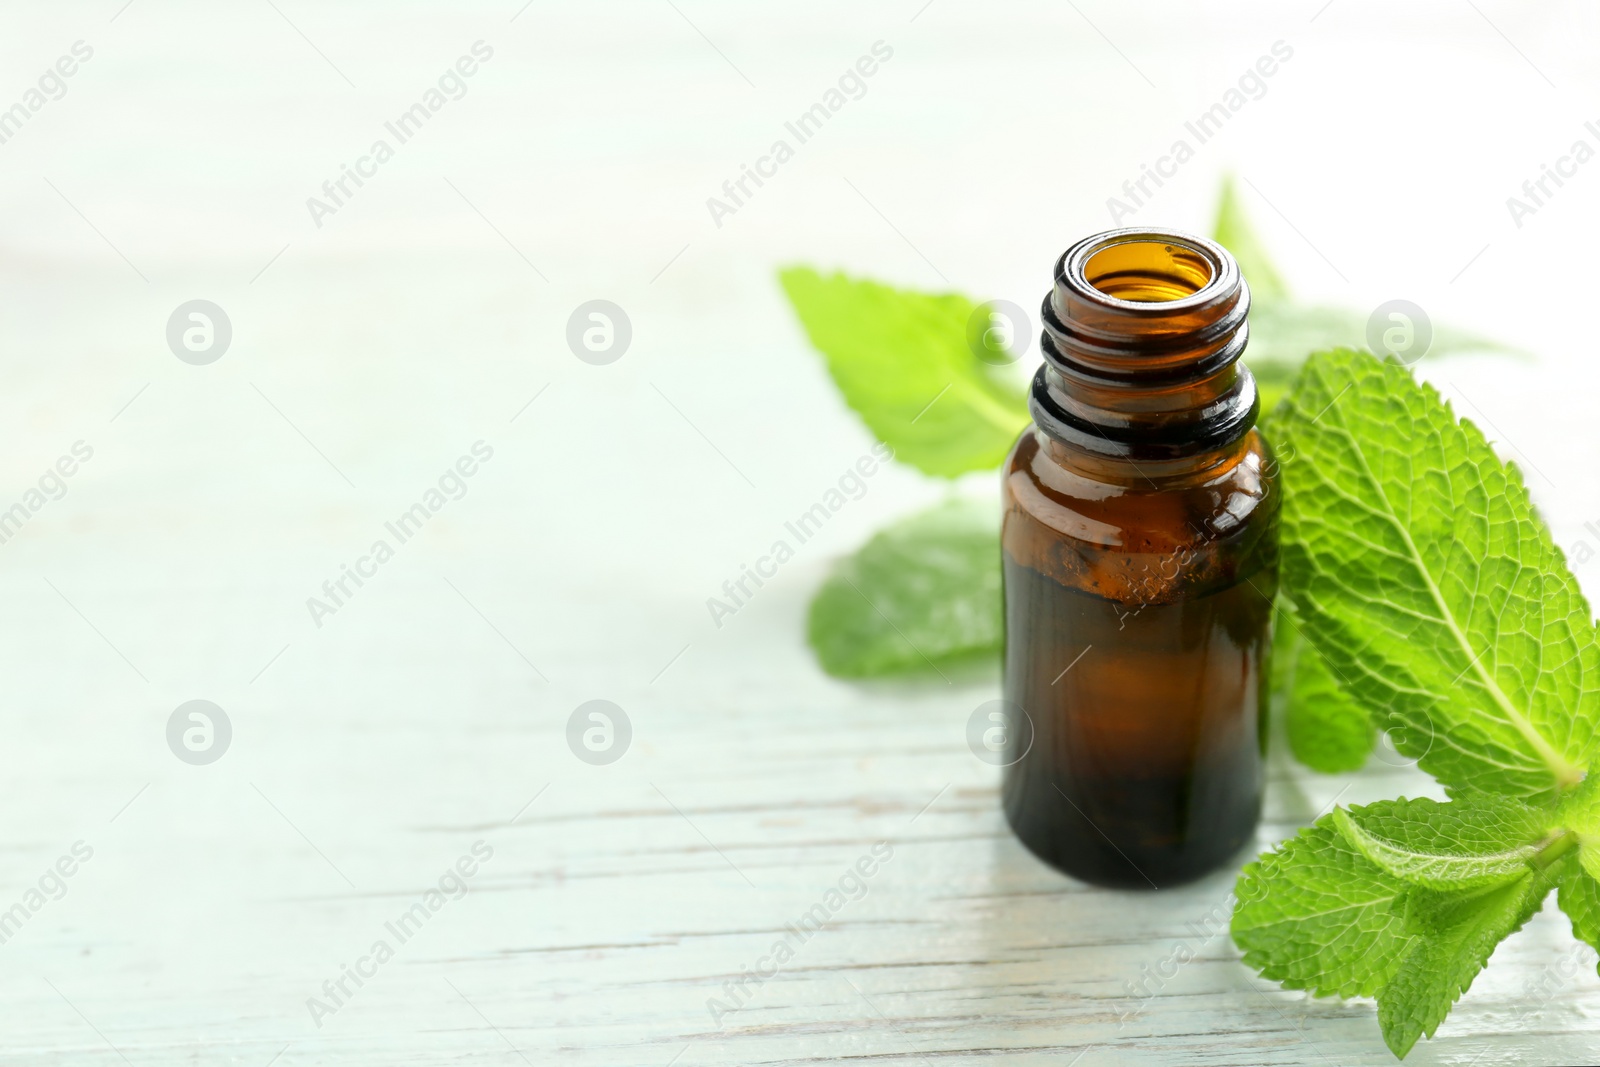 Photo of Bottle of essential oil and mint leaves  on wooden table